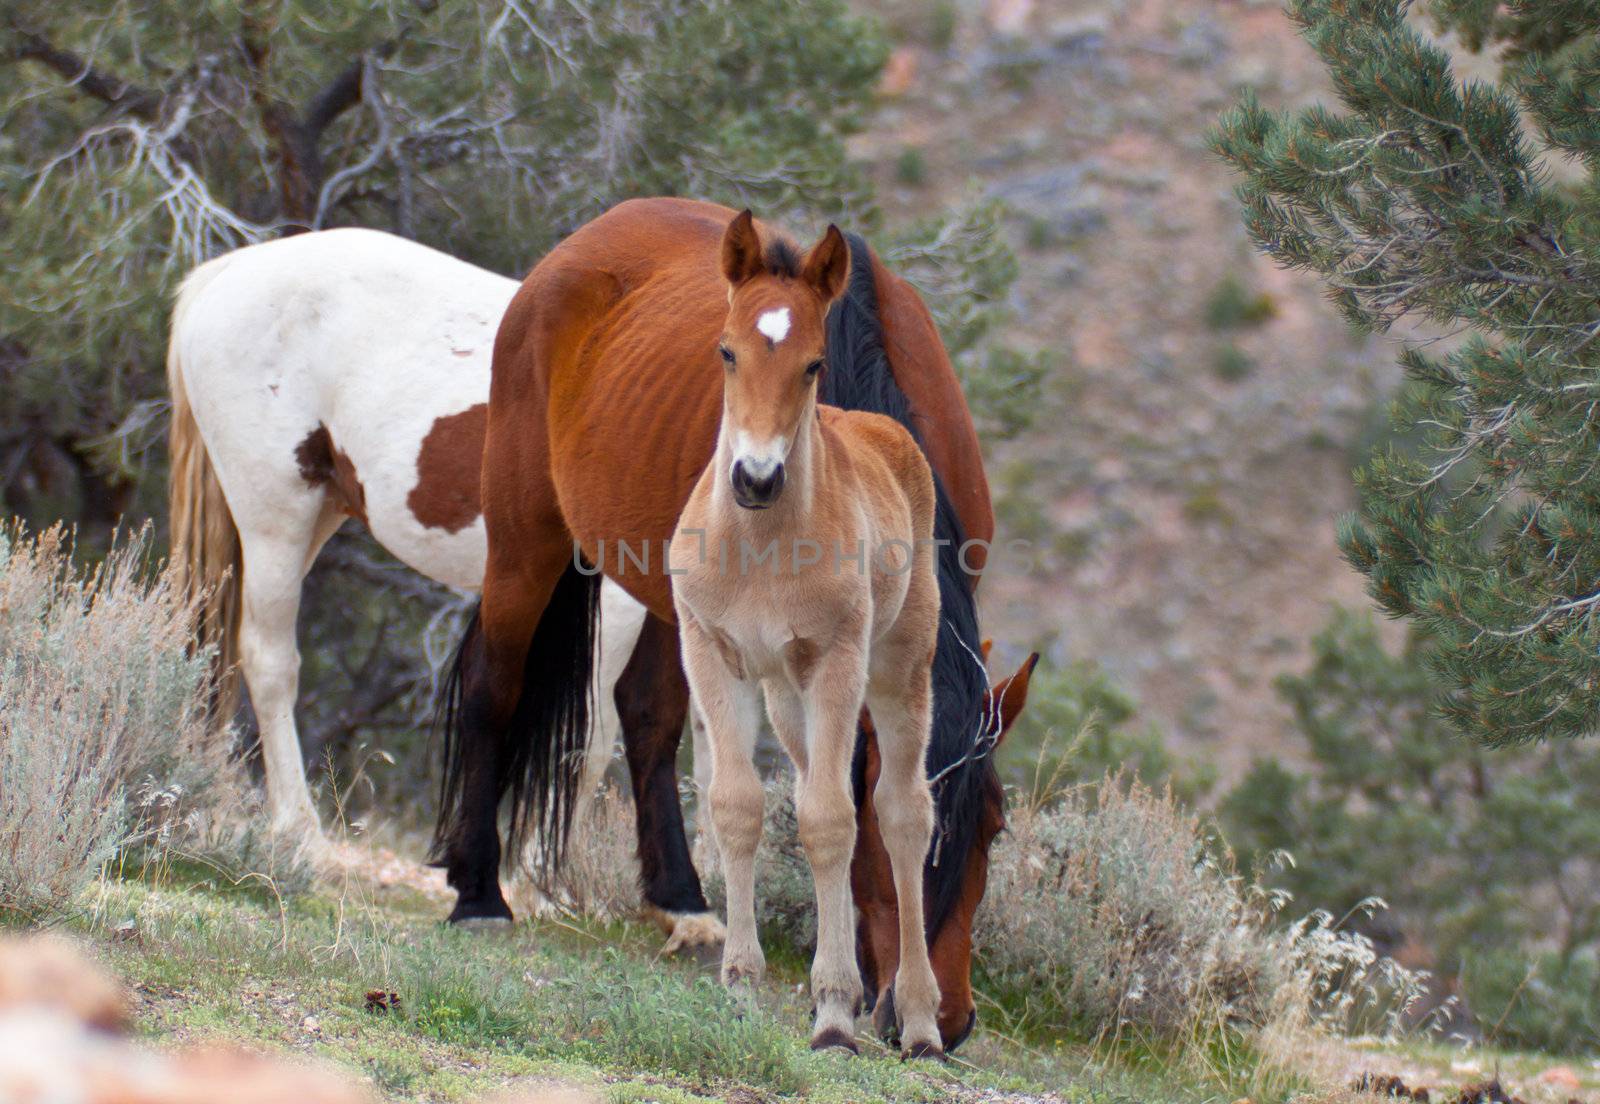 An infant wild horse.  The horse is standing close to his mom.